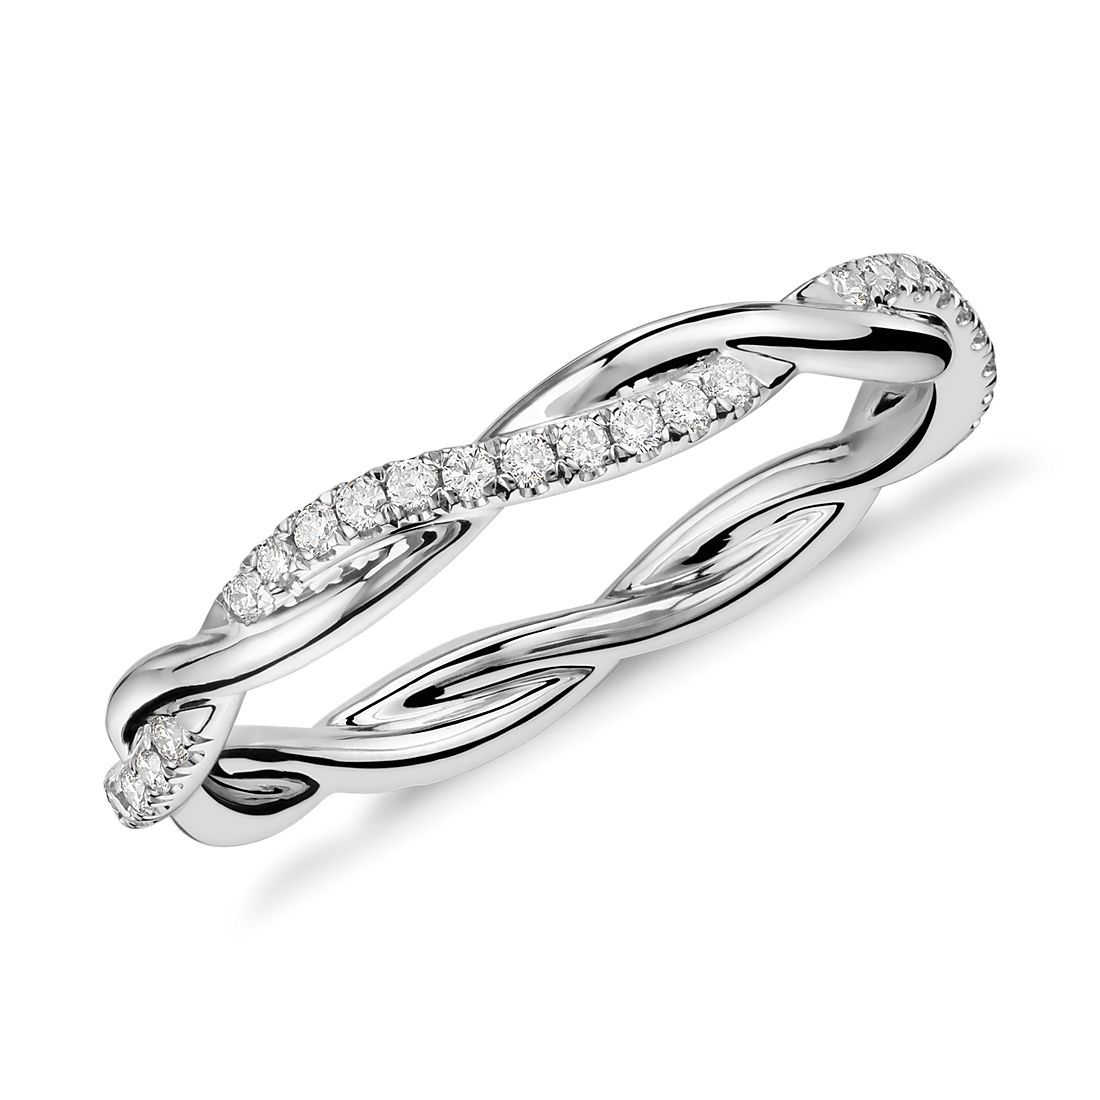 Petite Twist Diamond Engagement Ring in Platinum by Blue Nile